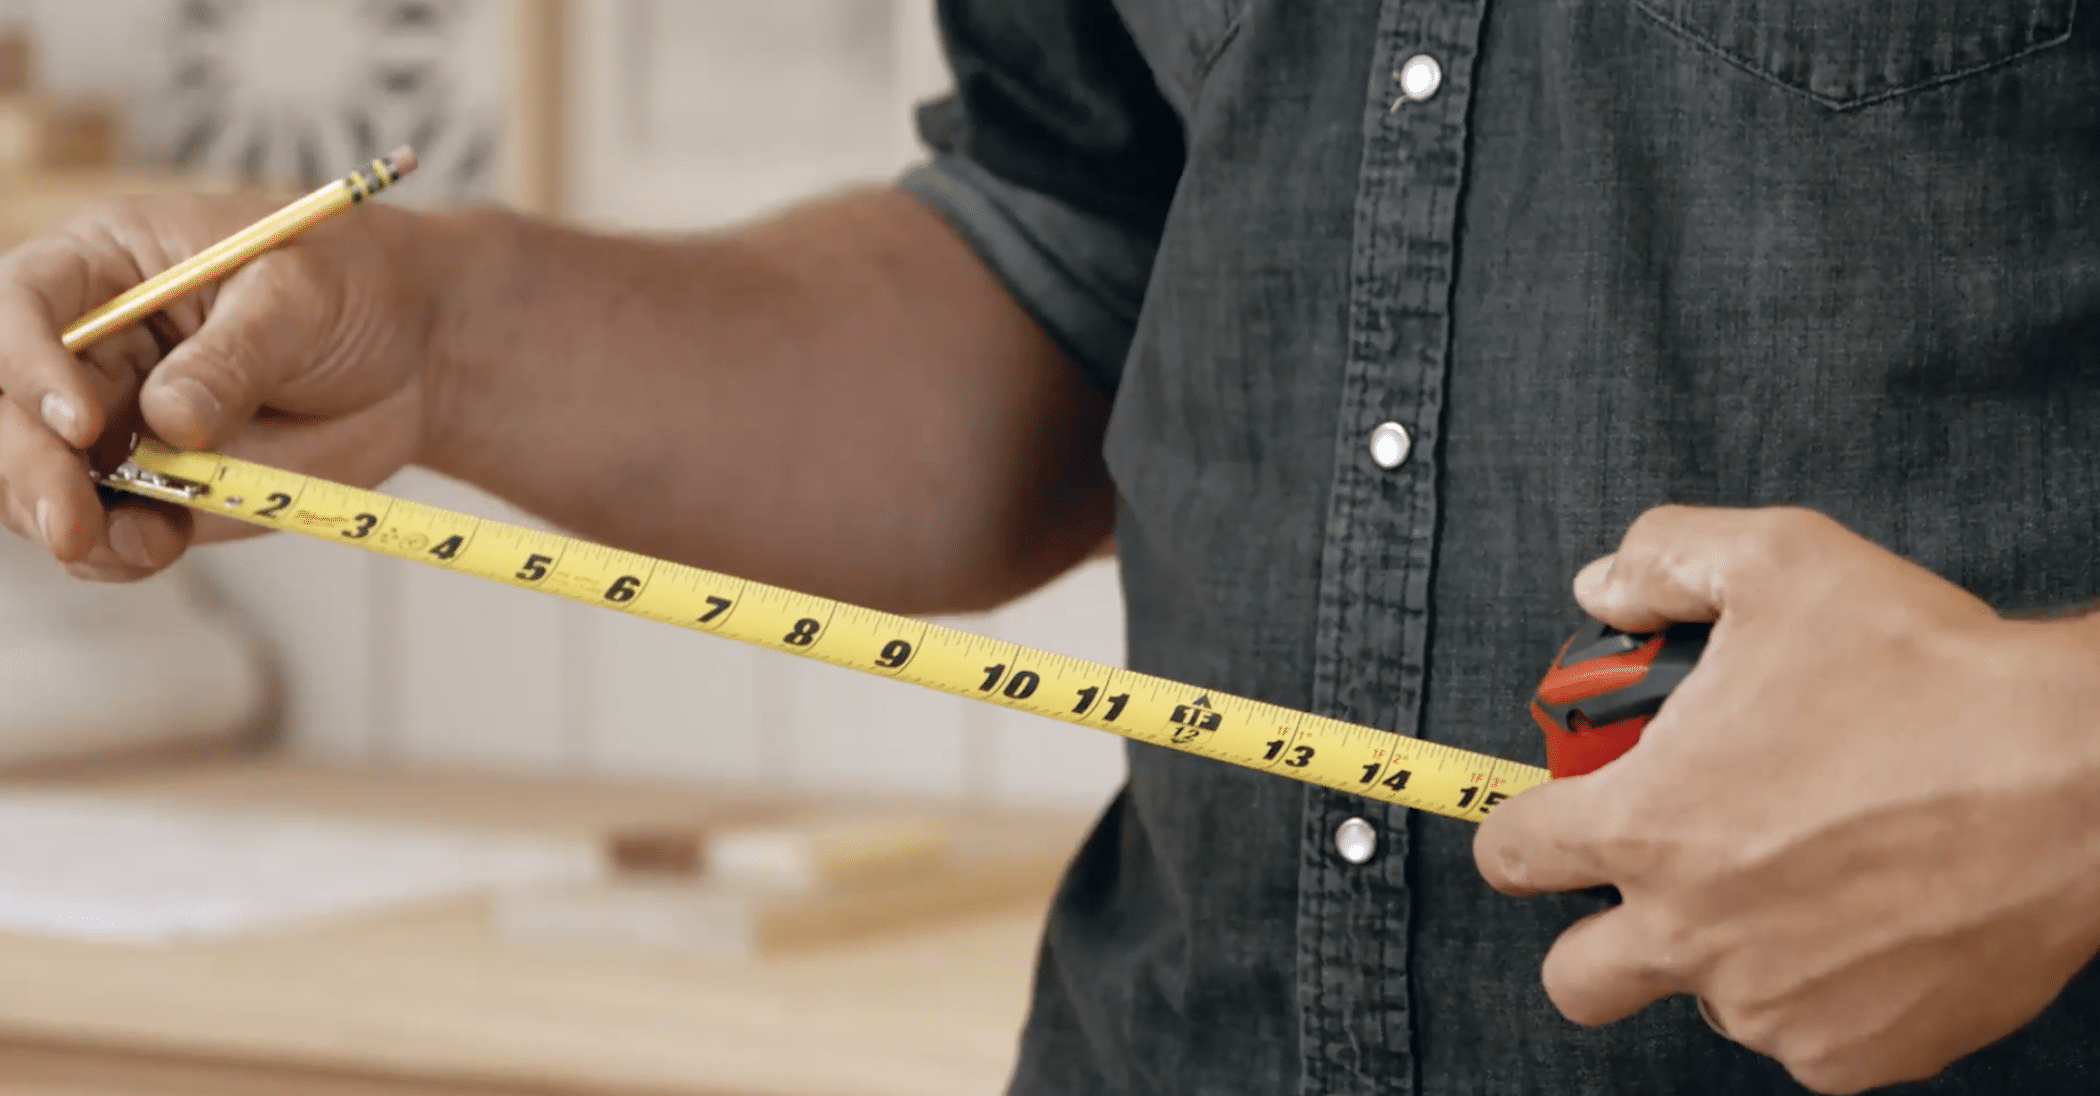 Made to measure furniture: proper measurements are really